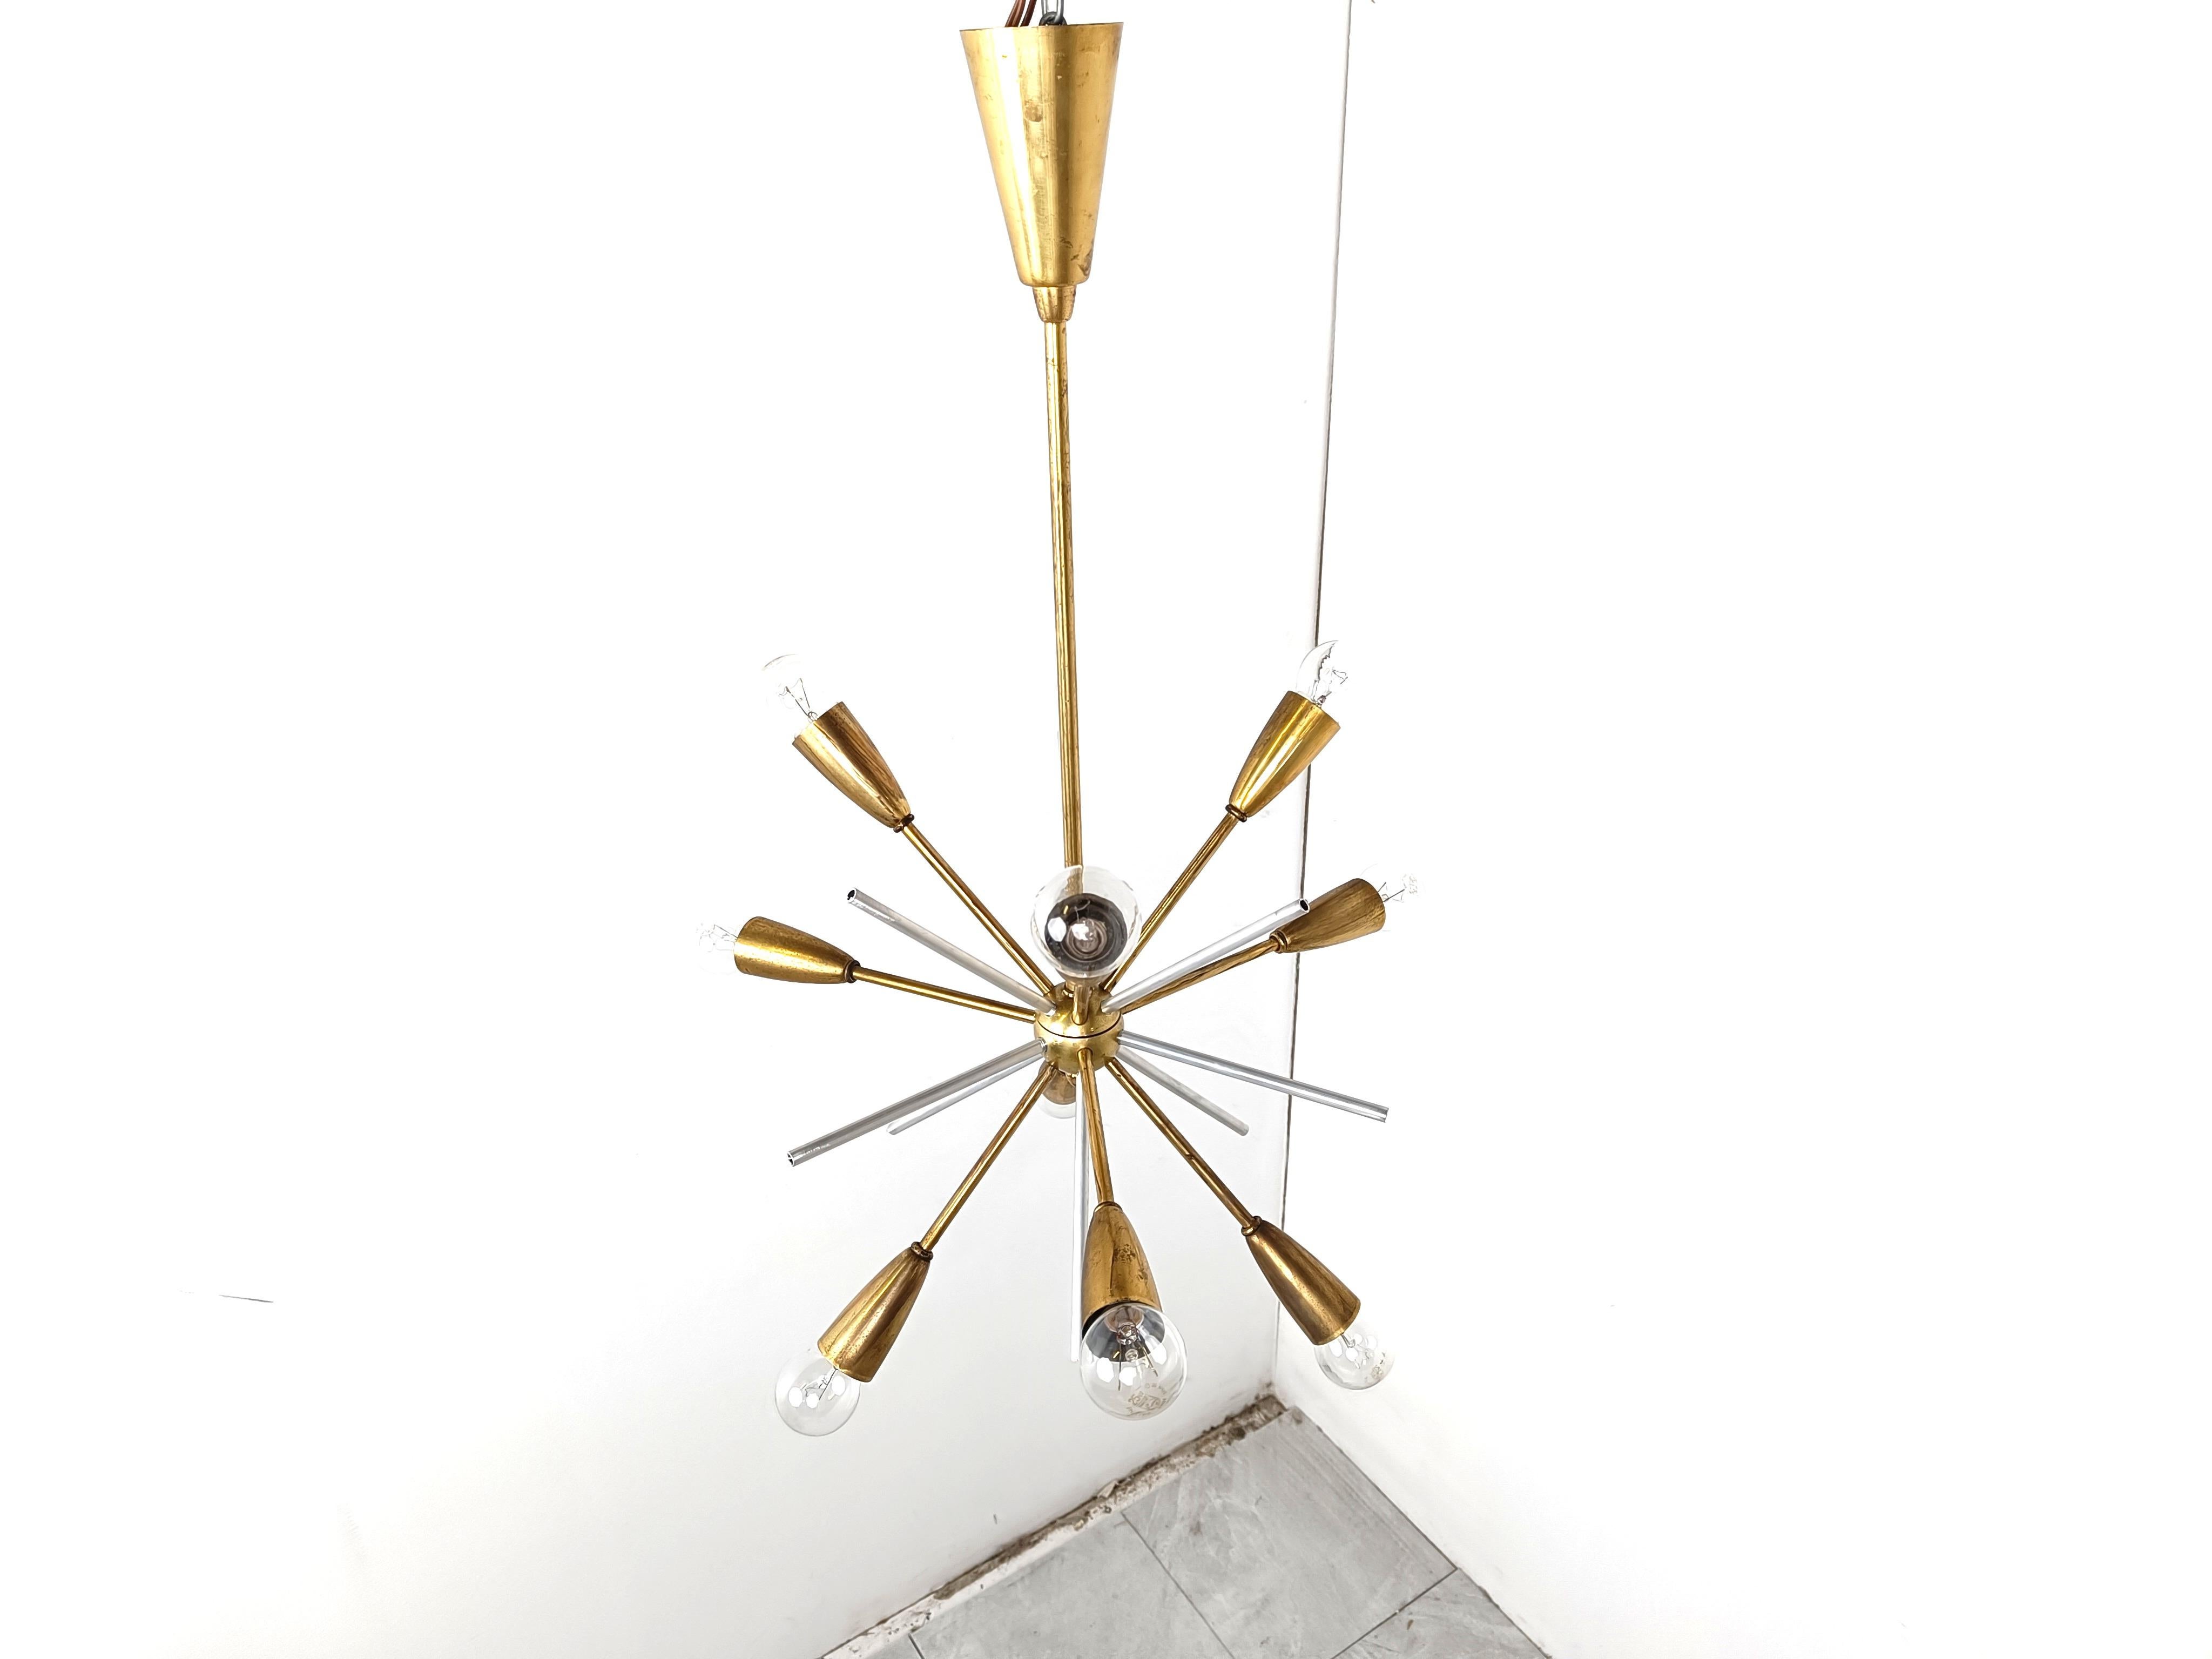 Rare brass and lucite sputnik chandelier.

The chandelier creates a stunning light effect.

Tested and ready for use. To be used with regular E14 light bulbs.

The chandelier is in good condition.

1970s - Belgium

Height: 70cm
Diameter: 45cm

Ref.: